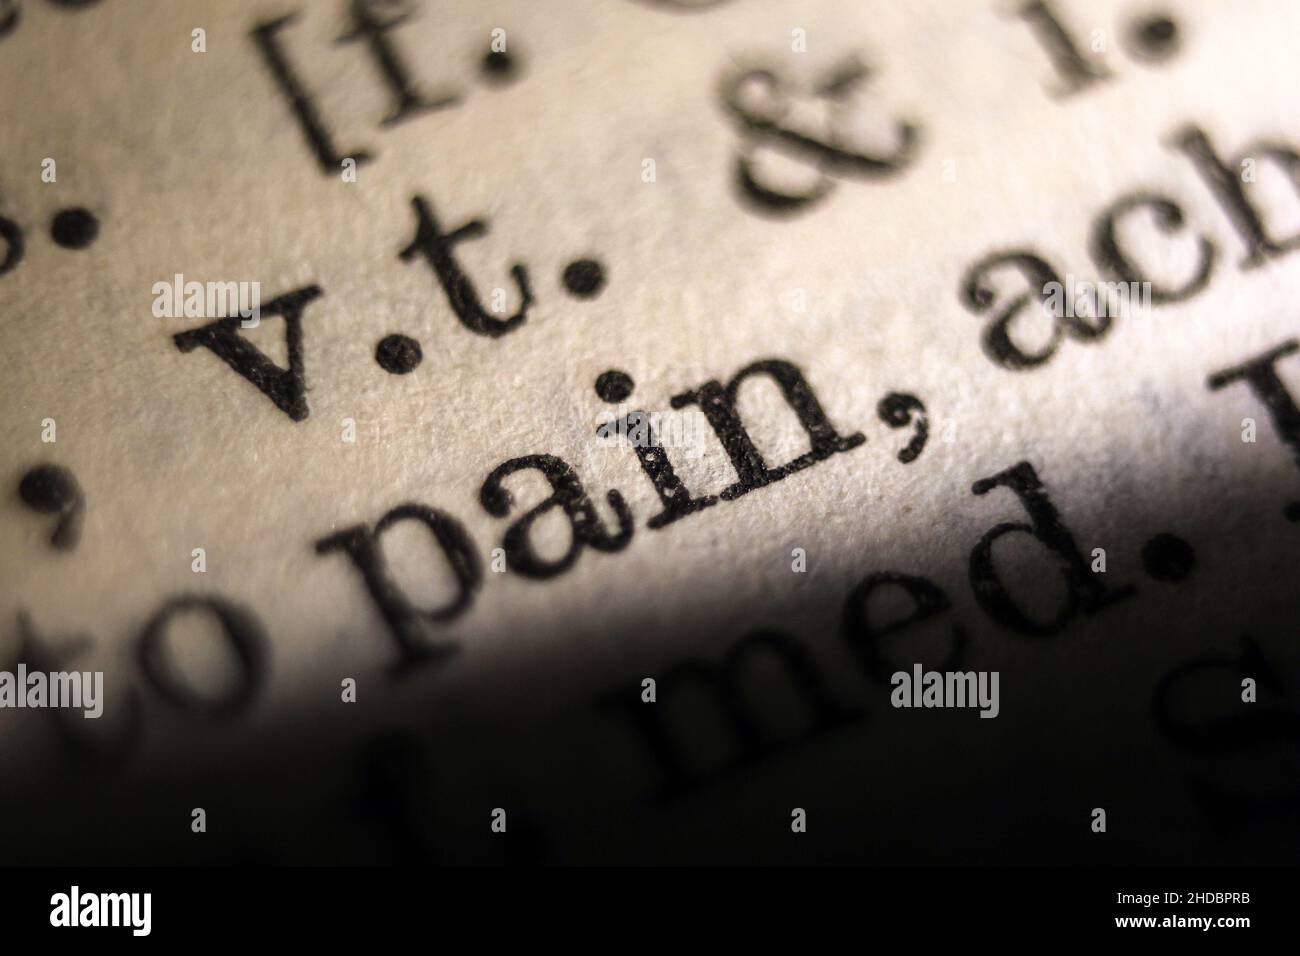 Word 'pain' printed on book page, macro close-up Stock Photo